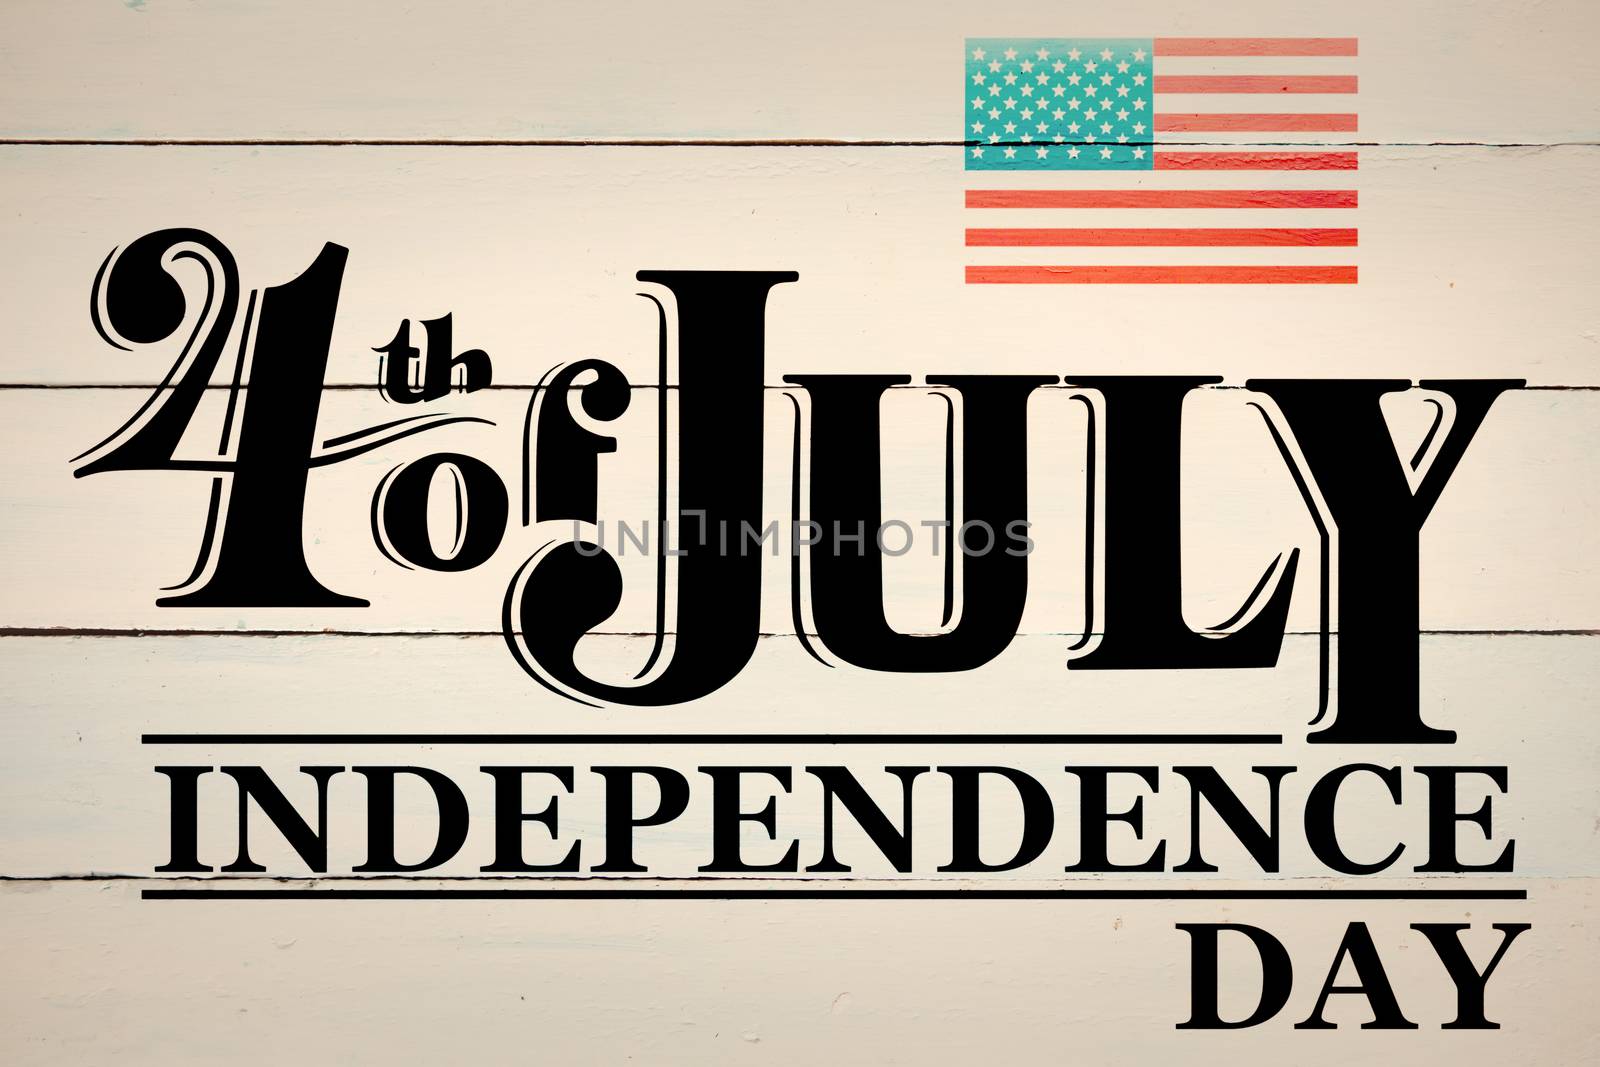 Independence day graphic against painted blue wooden planks